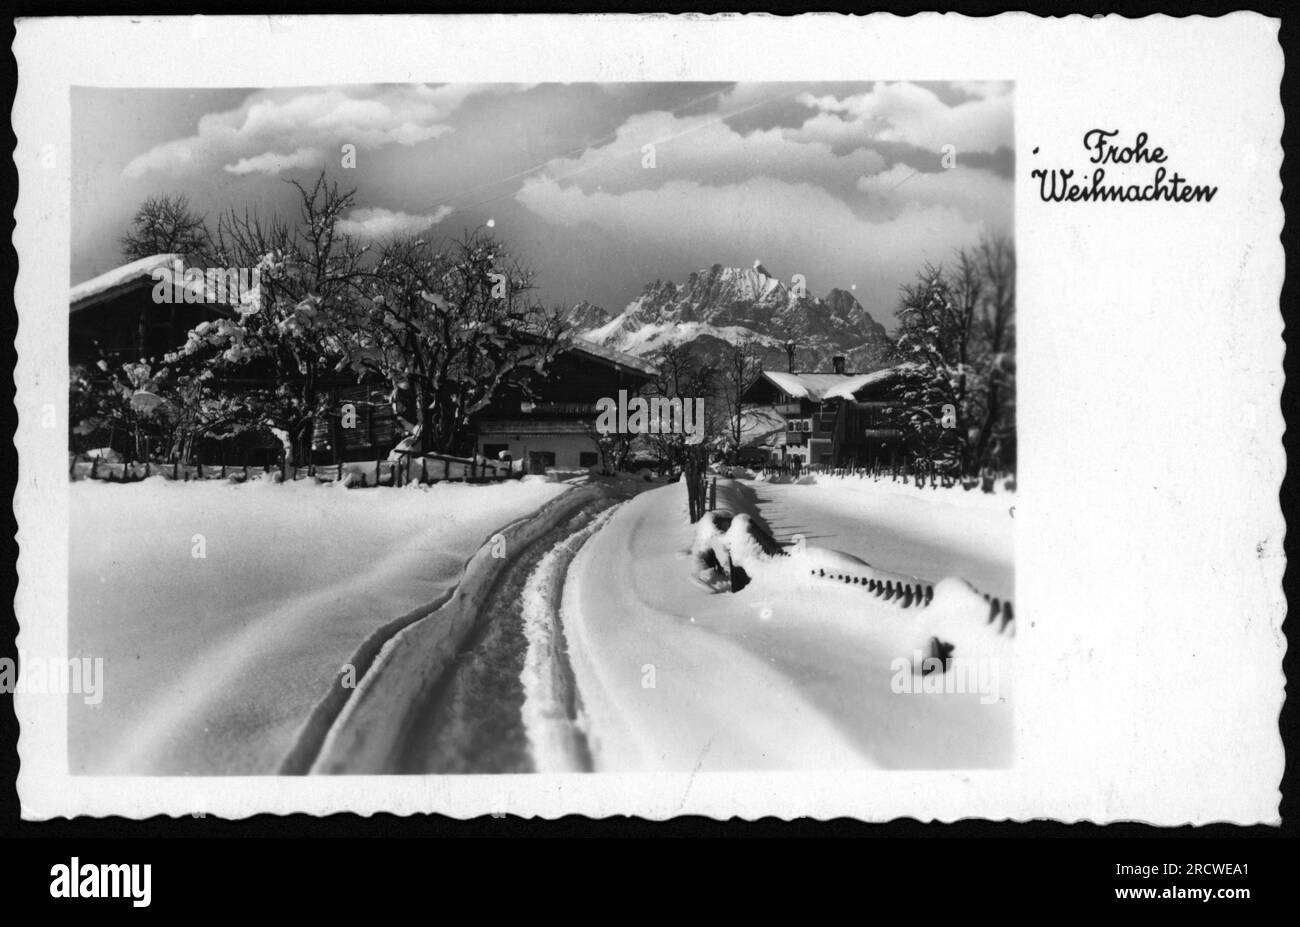 Christmas, greetings card, winter landscape, picture postcard, stamp: 21.12.1935, ADDITIONAL-RIGHTS-CLEARANCE-INFO-NOT-AVAILABLE Stock Photo